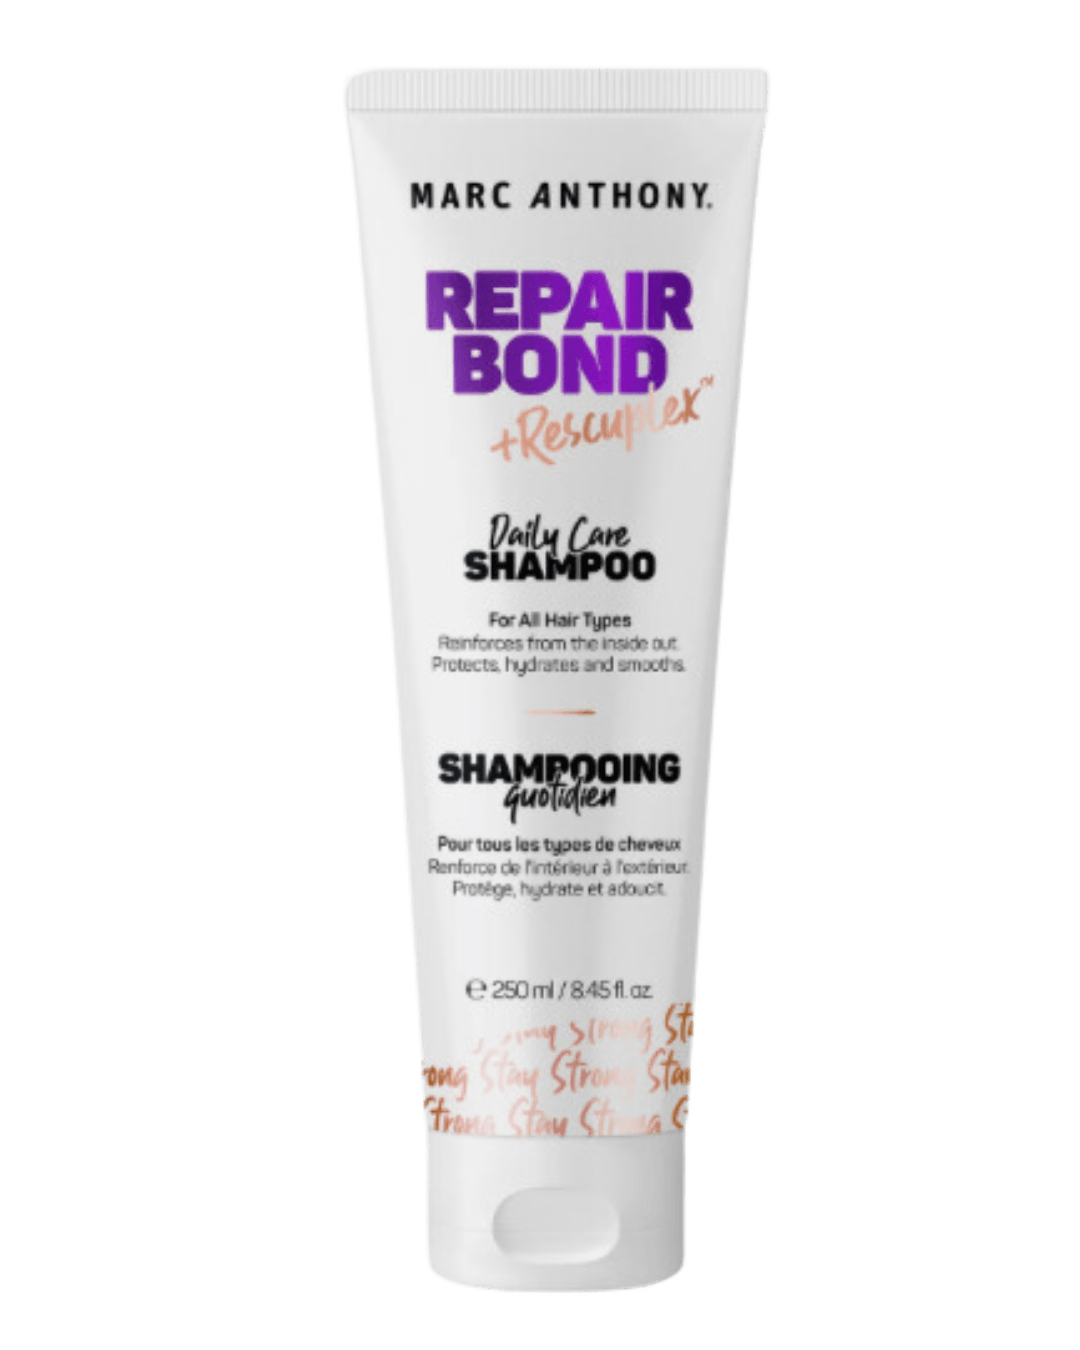 Daily Vanity Beauty Awards 2024 Best  Marc Anthony Repair Bond +Rescuplex Shampoo Voted By Beauty Experts